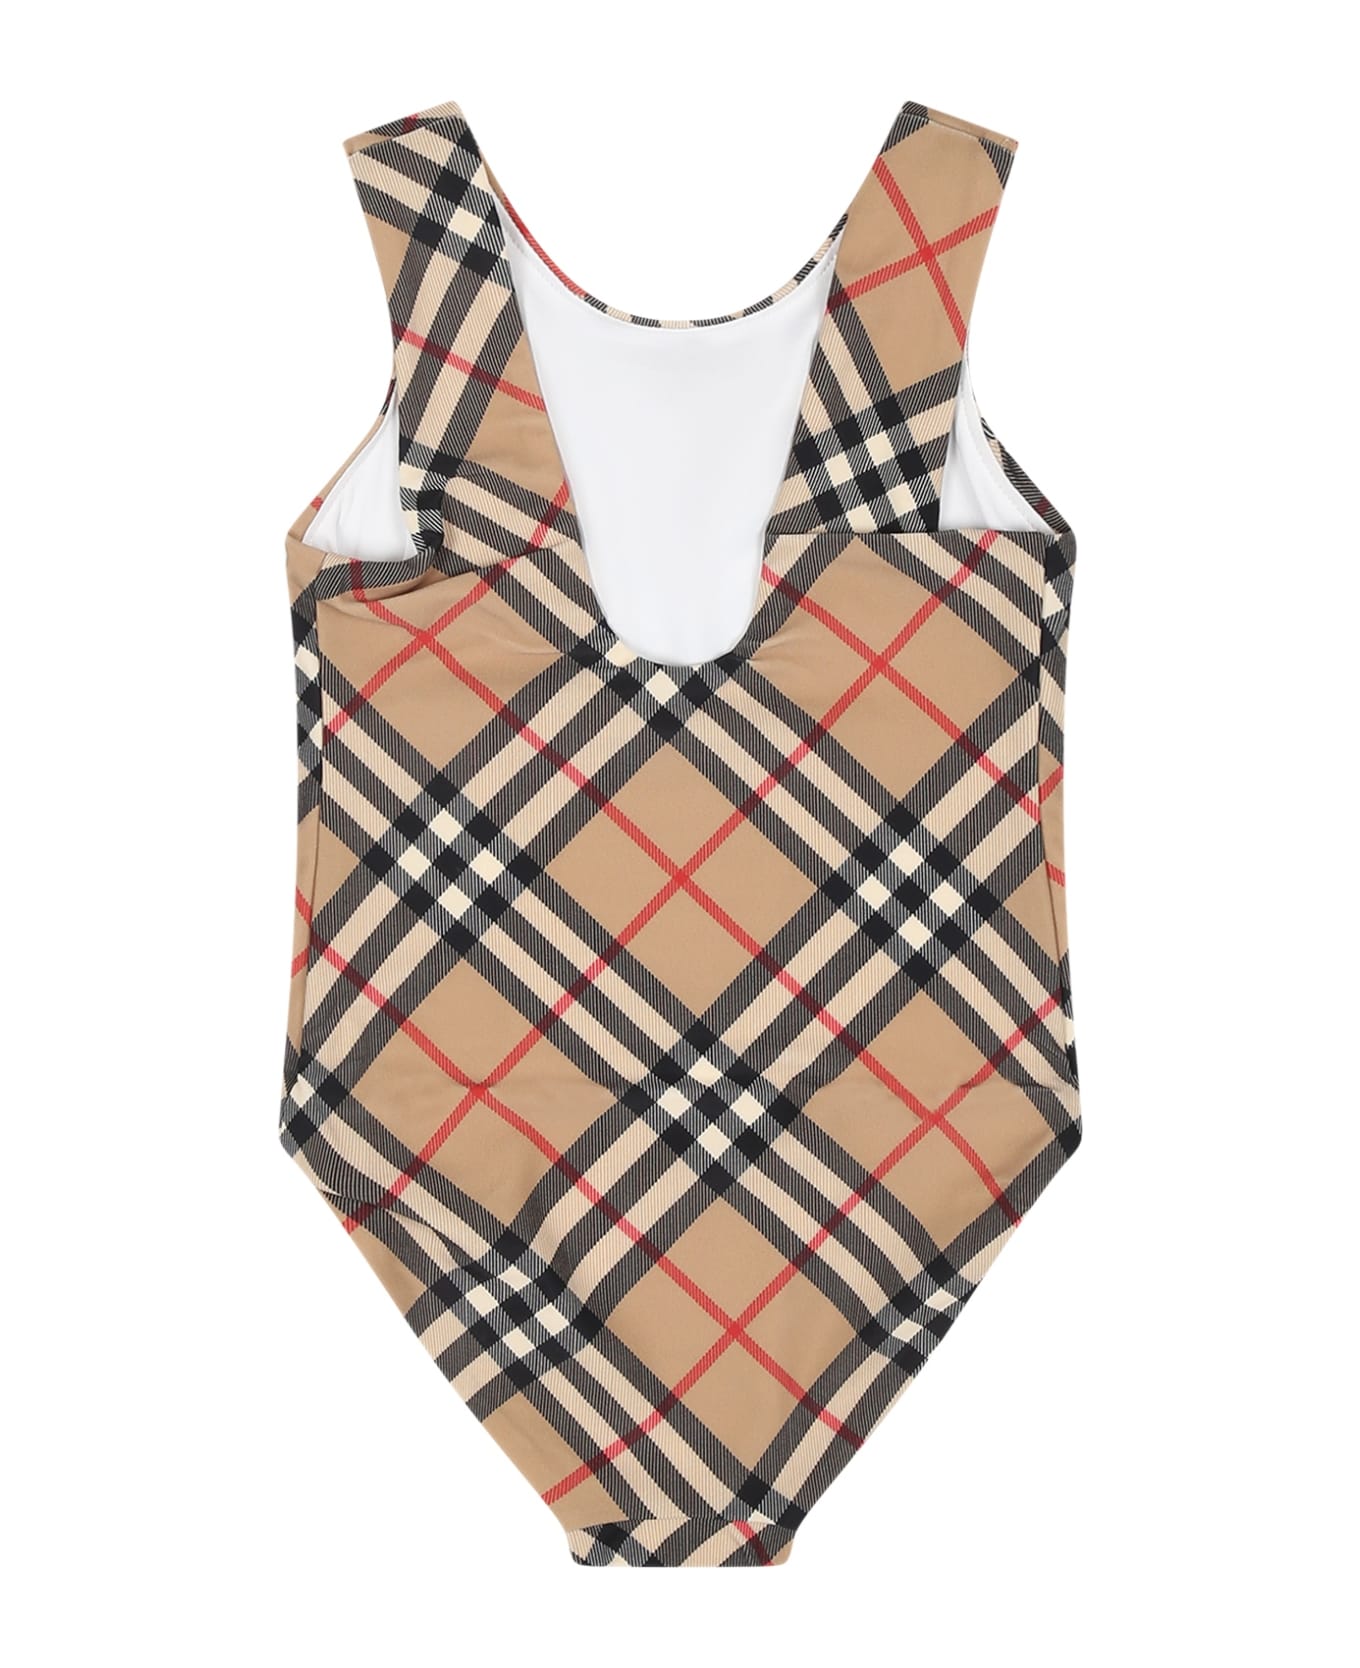 Burberry Beige Swimsuit For Baby Girl With Iconic Check - Archive Beige Ip Check